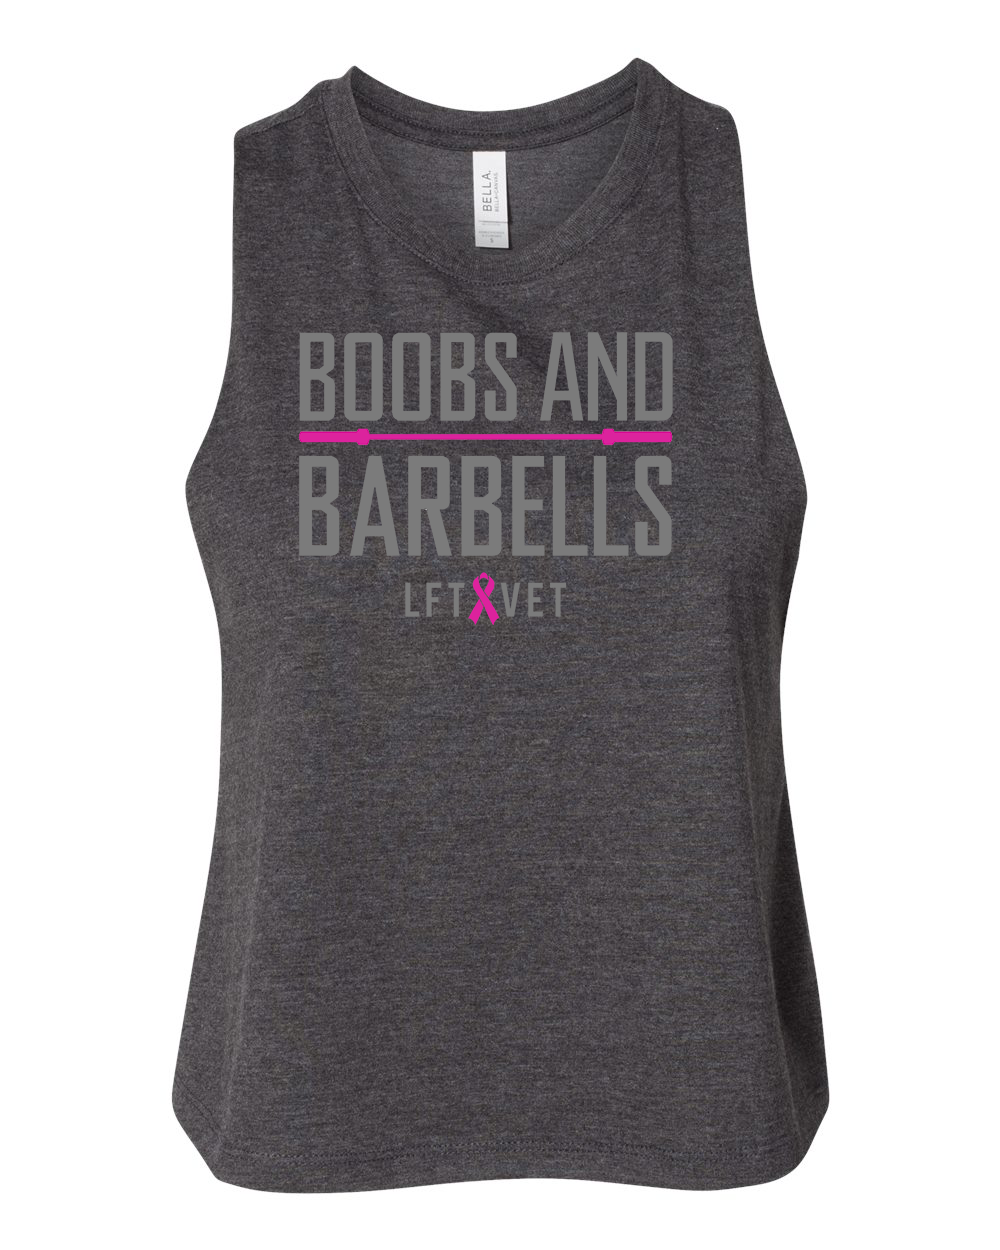 Boobs and Barbells Cropped Racerback